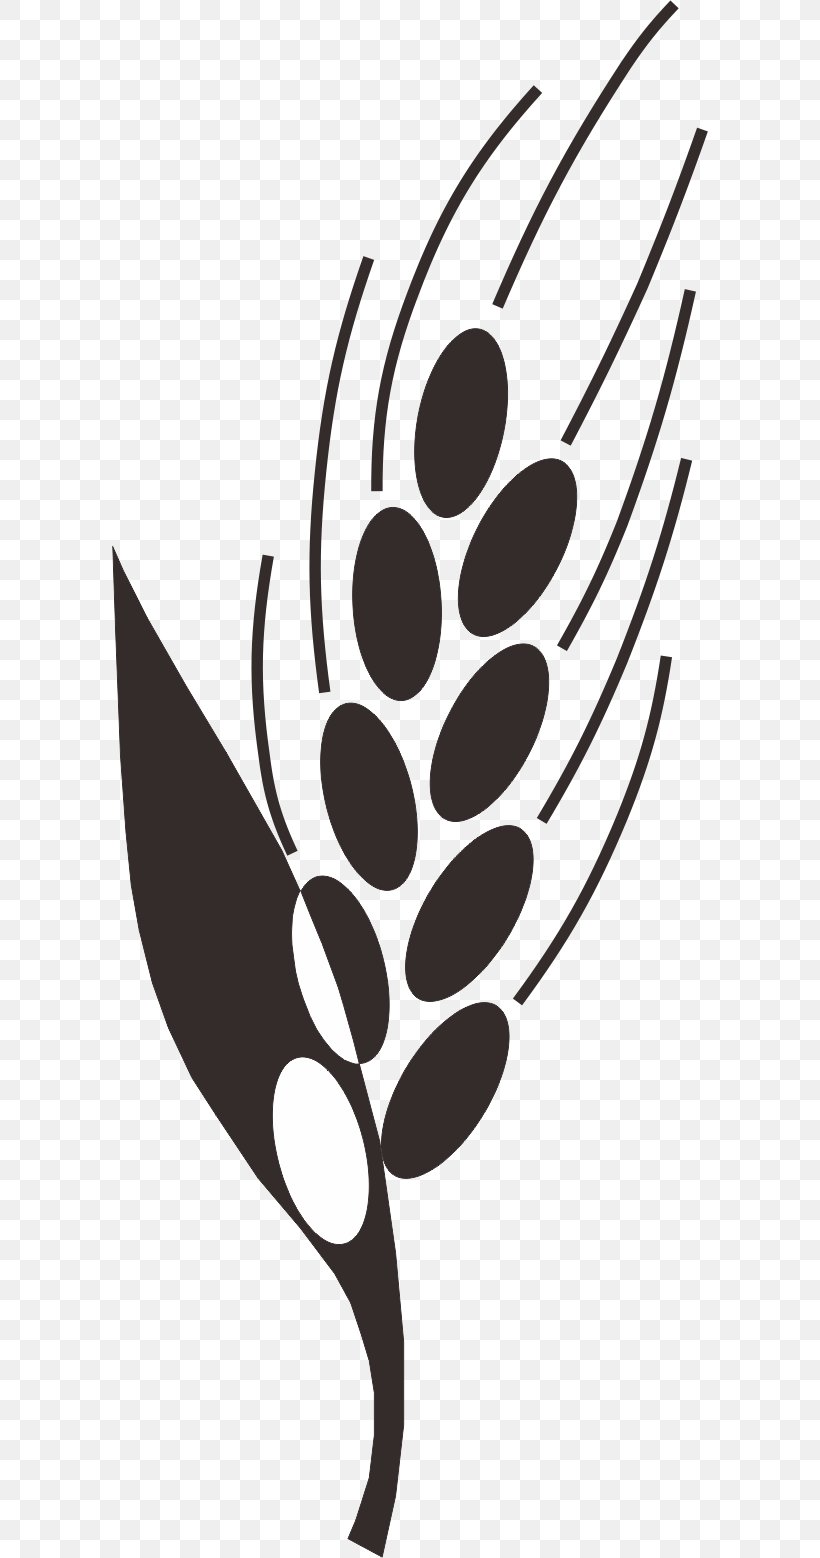 Paddy Field Oryza Sativa Clip Art, PNG, 596x1558px, Paddy Field, Advertising, Agriculture, Barley, Black And White Download Free